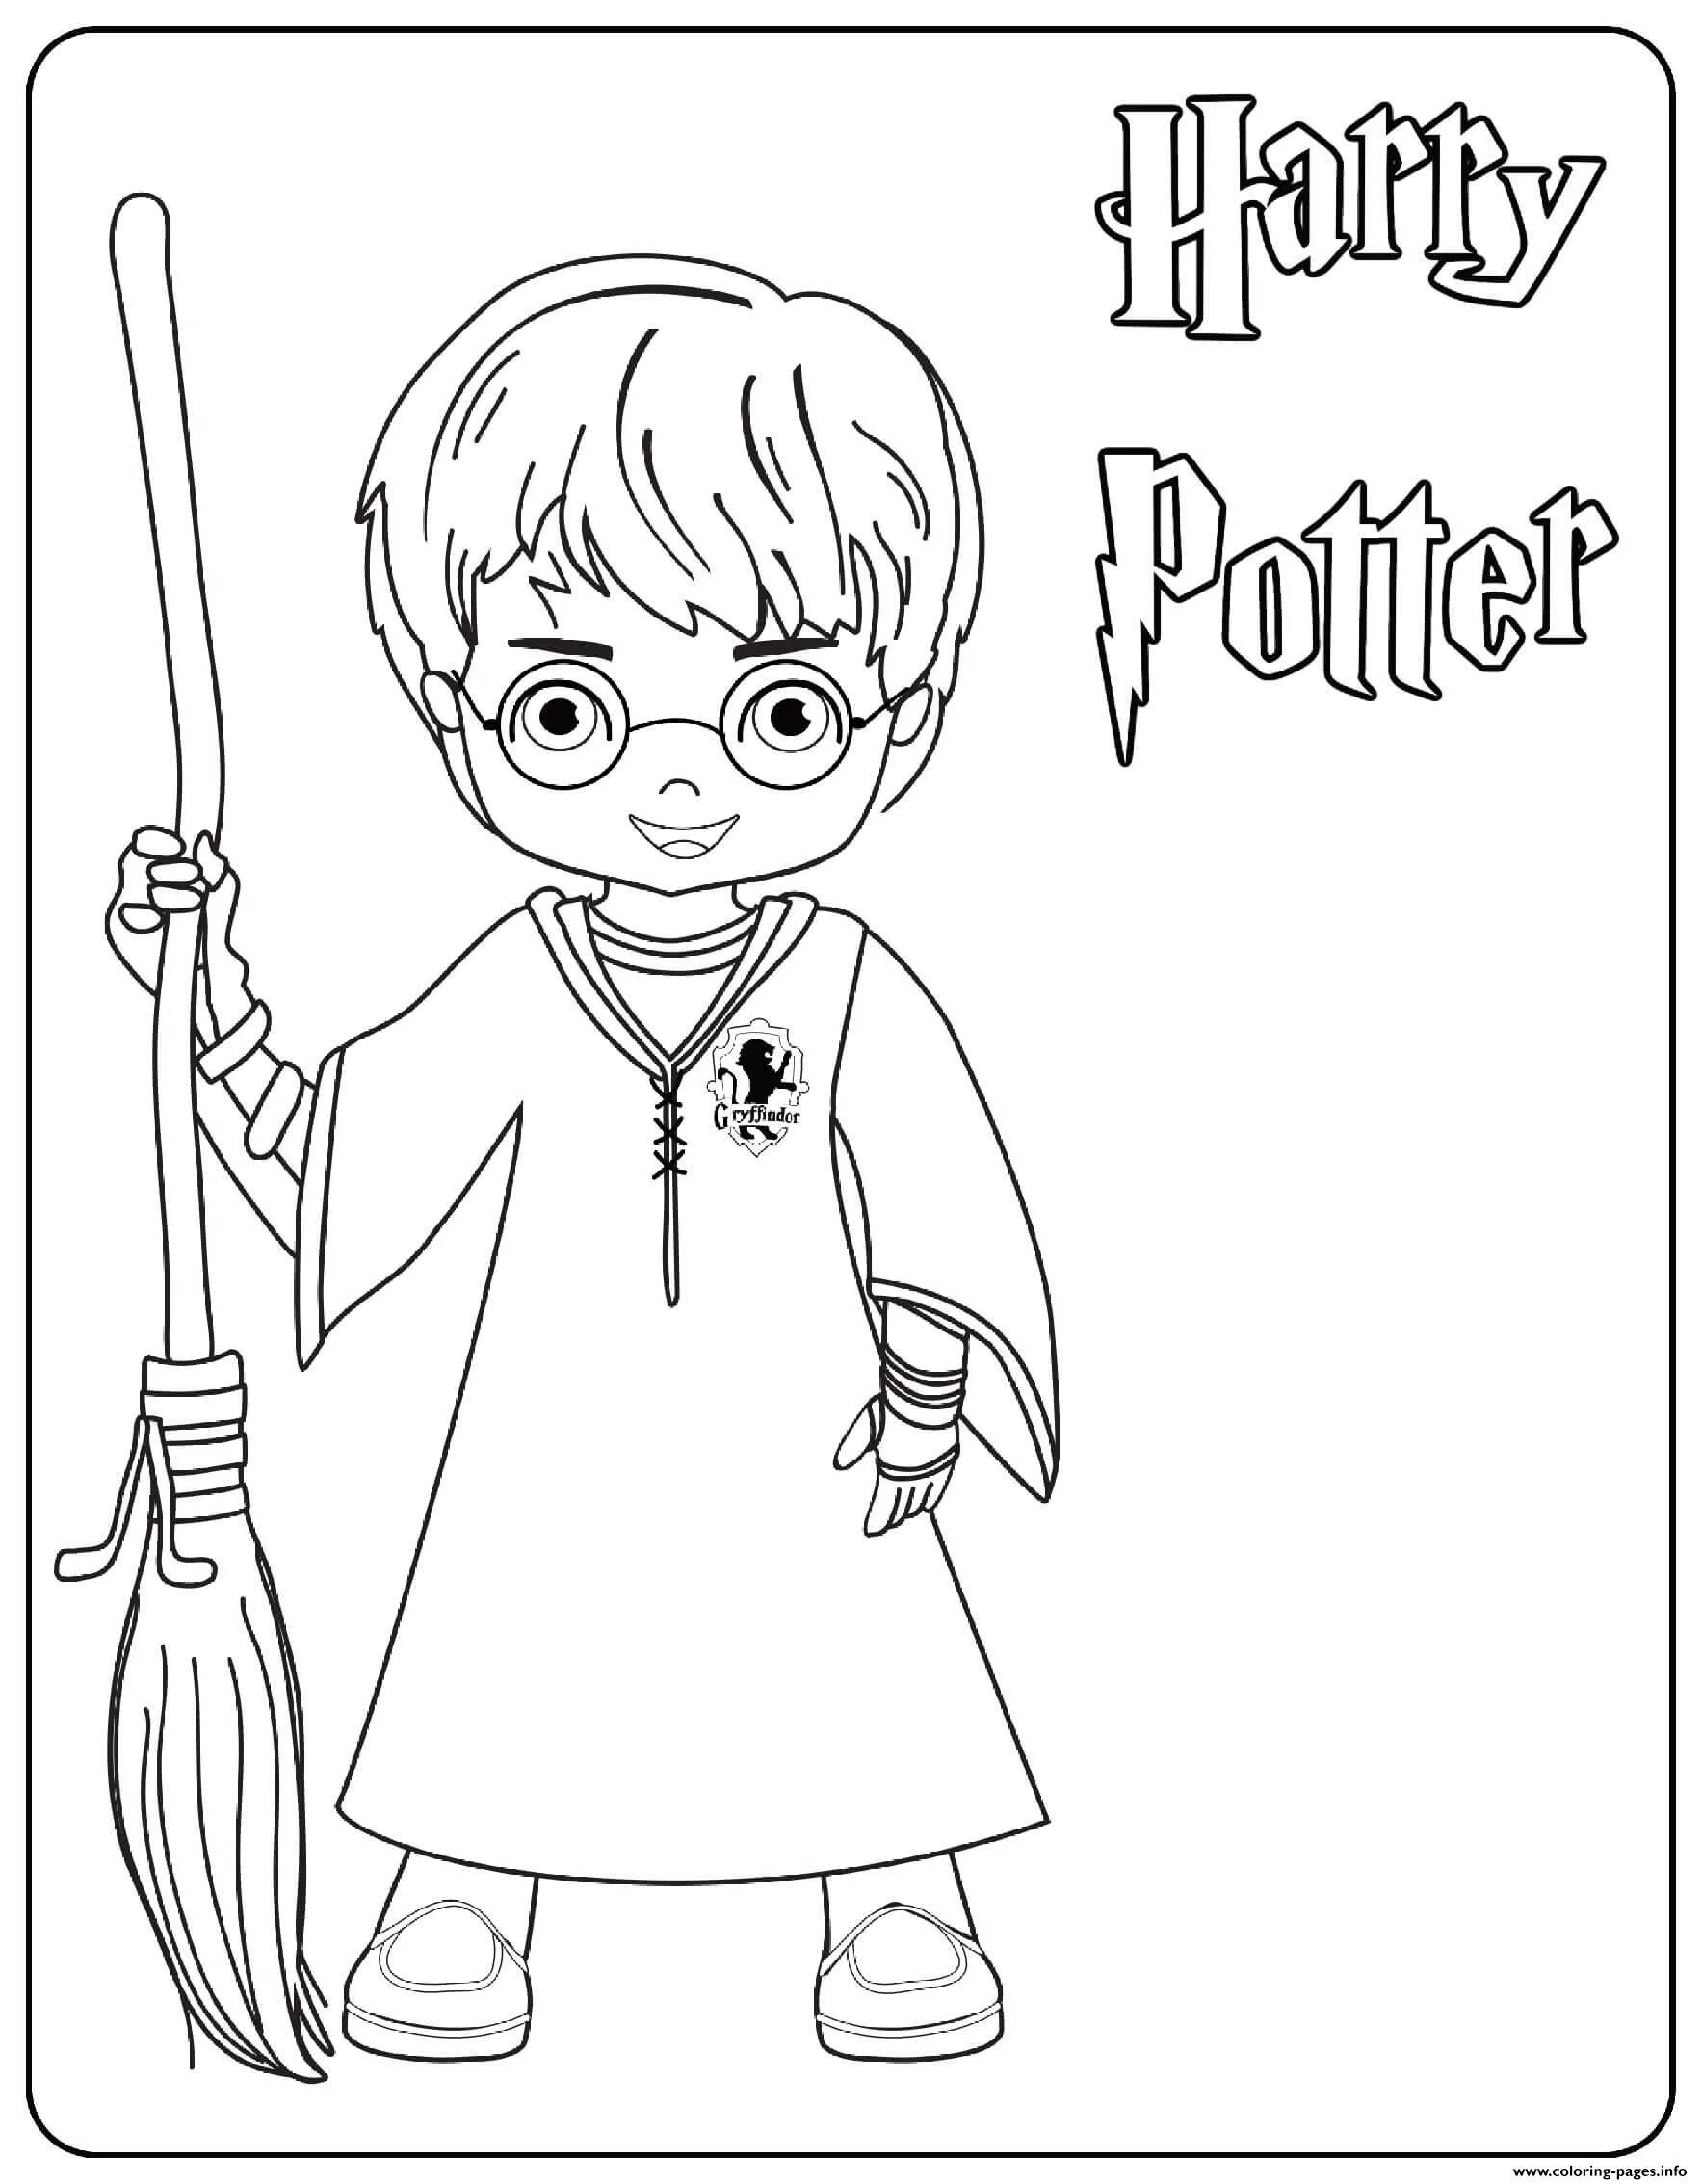 Glorious Draco Malfoy Spiral Coloring Page